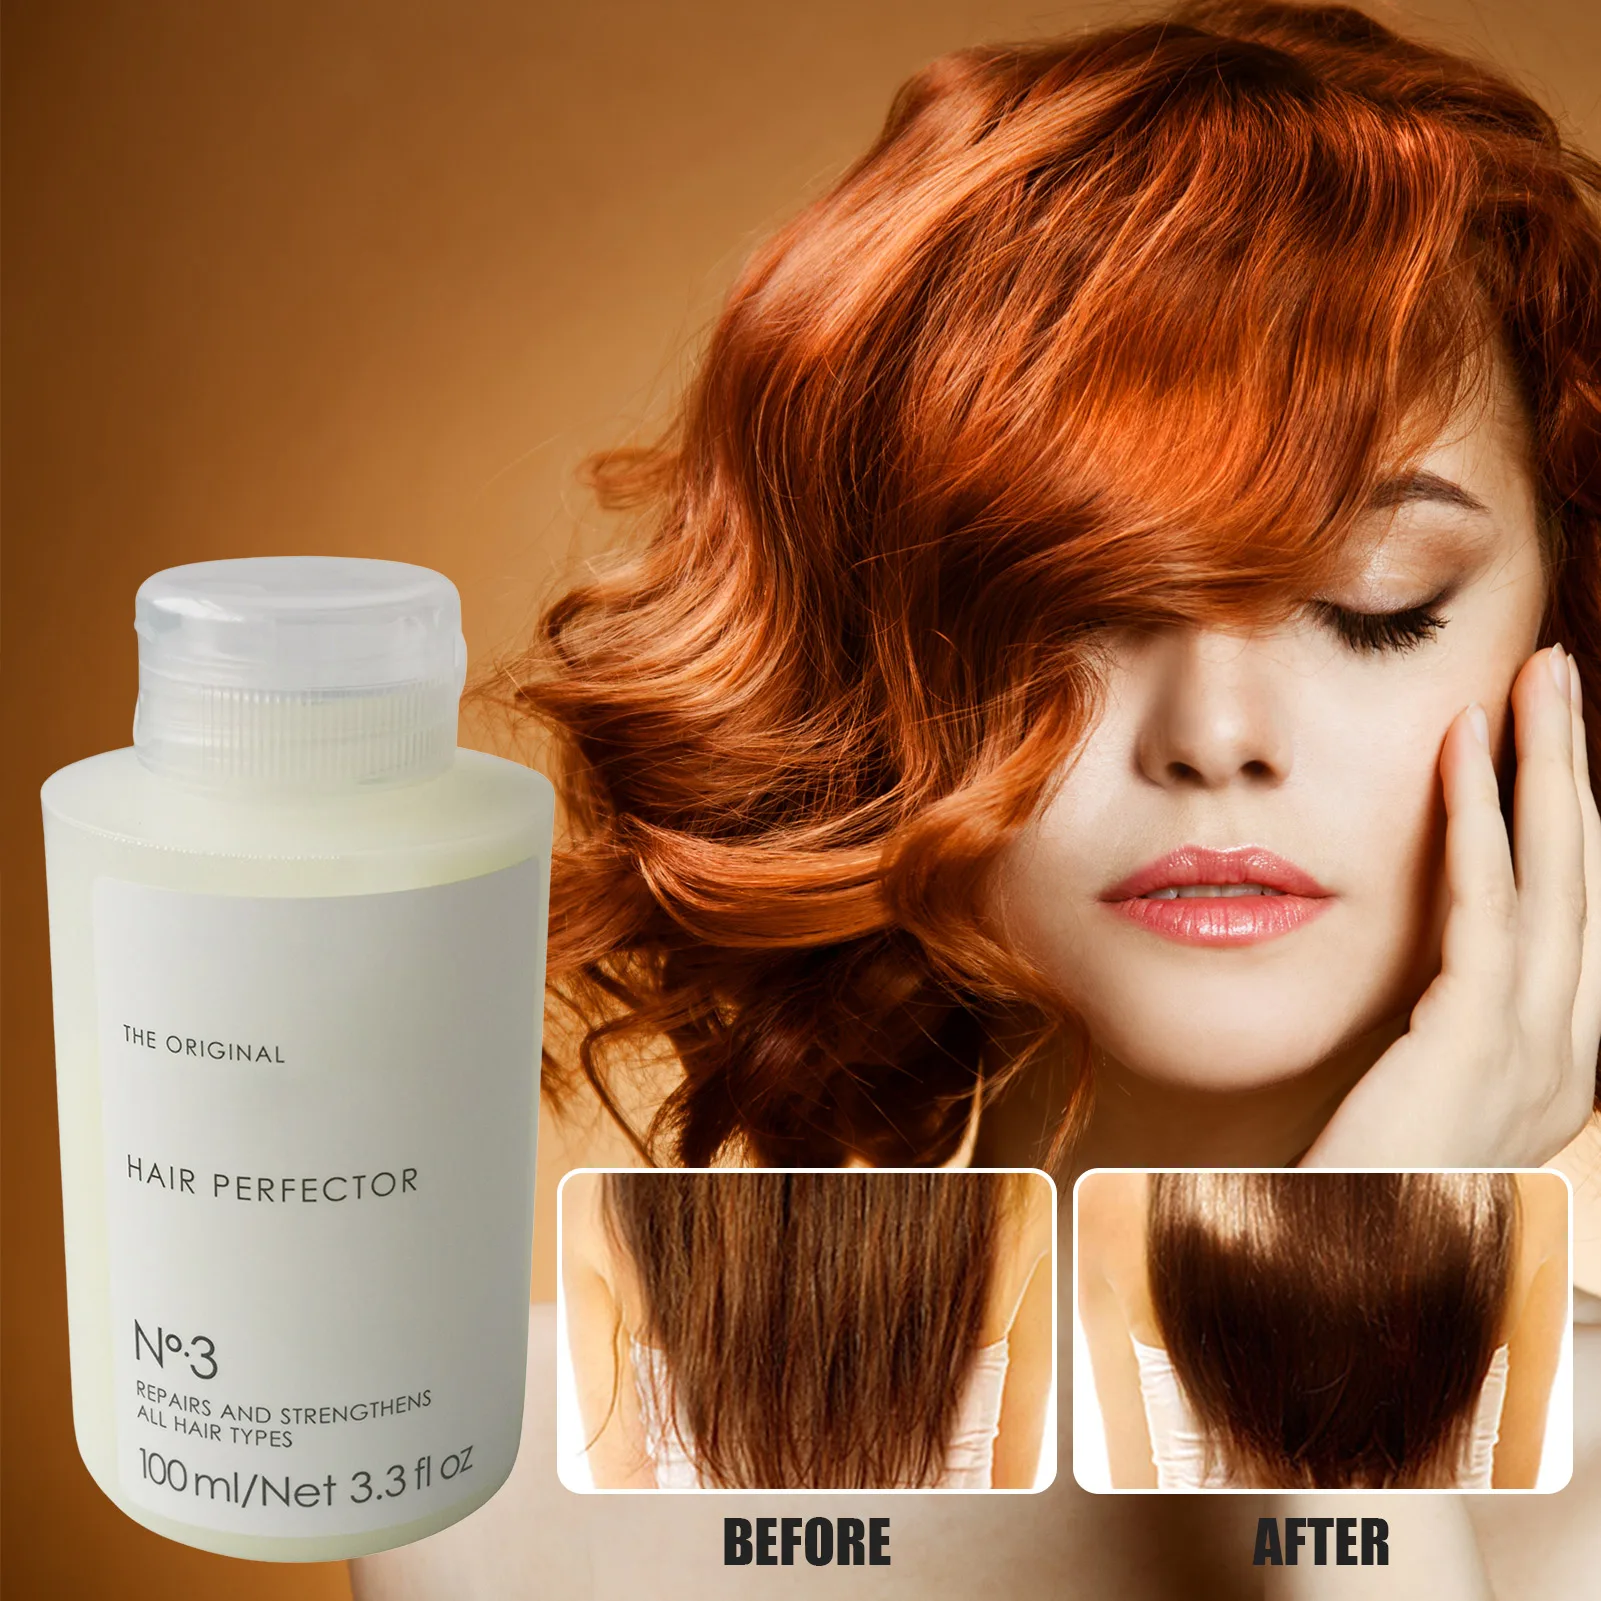 

Hair Perfector N3 Repairs And Strengthens All Hair Types NO Bond Smoother 100ml Dye Repair Agent Conditioner Hair Care Strengt